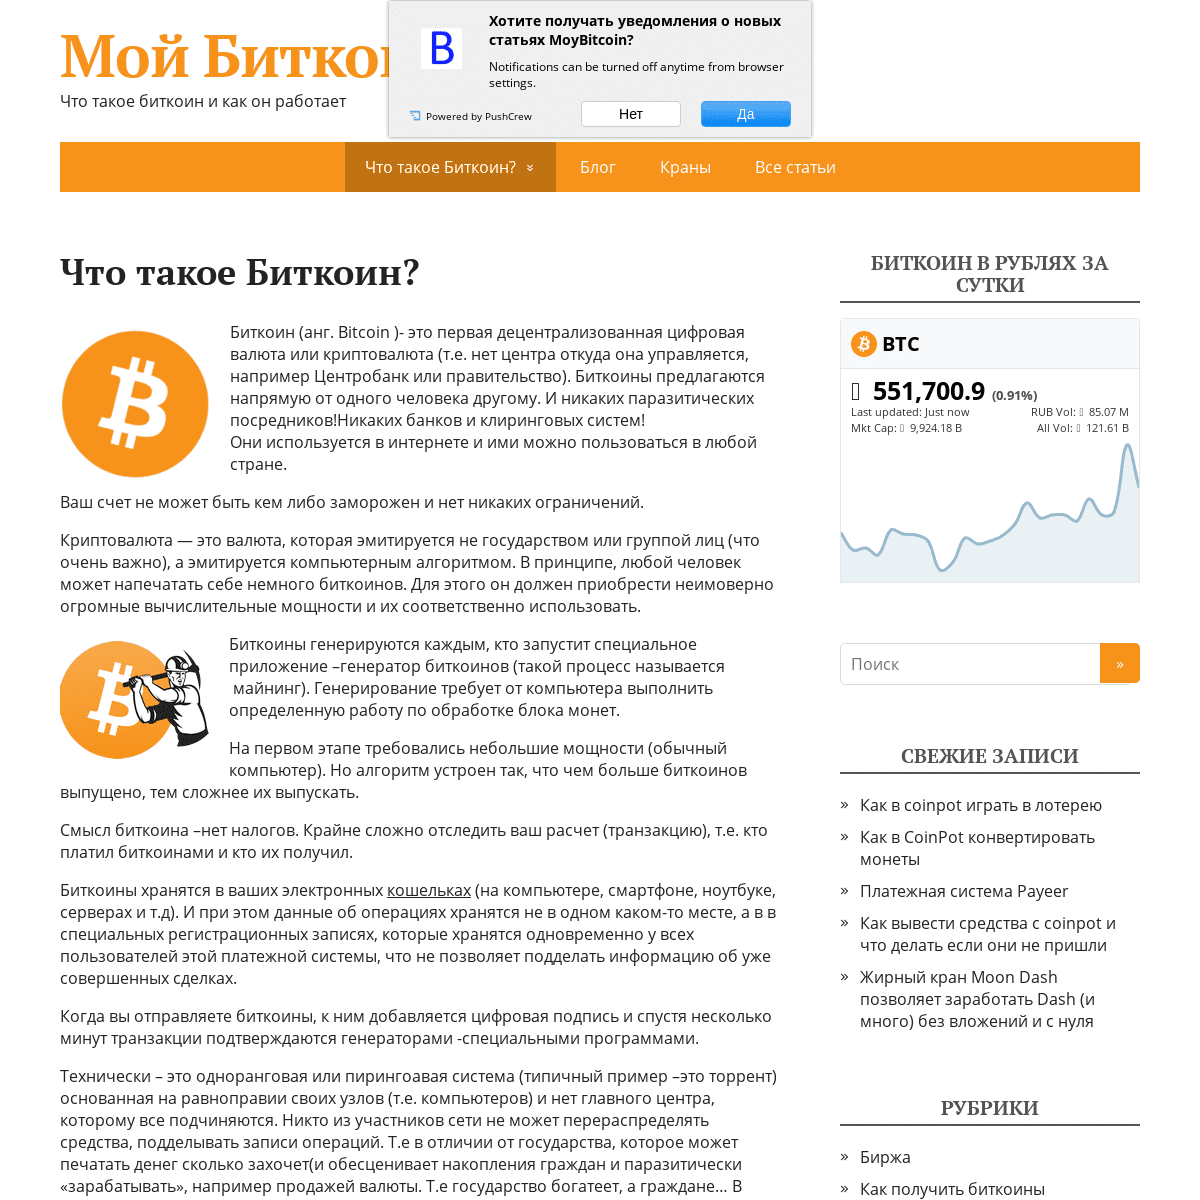 A complete backup of moybitcoin.ru